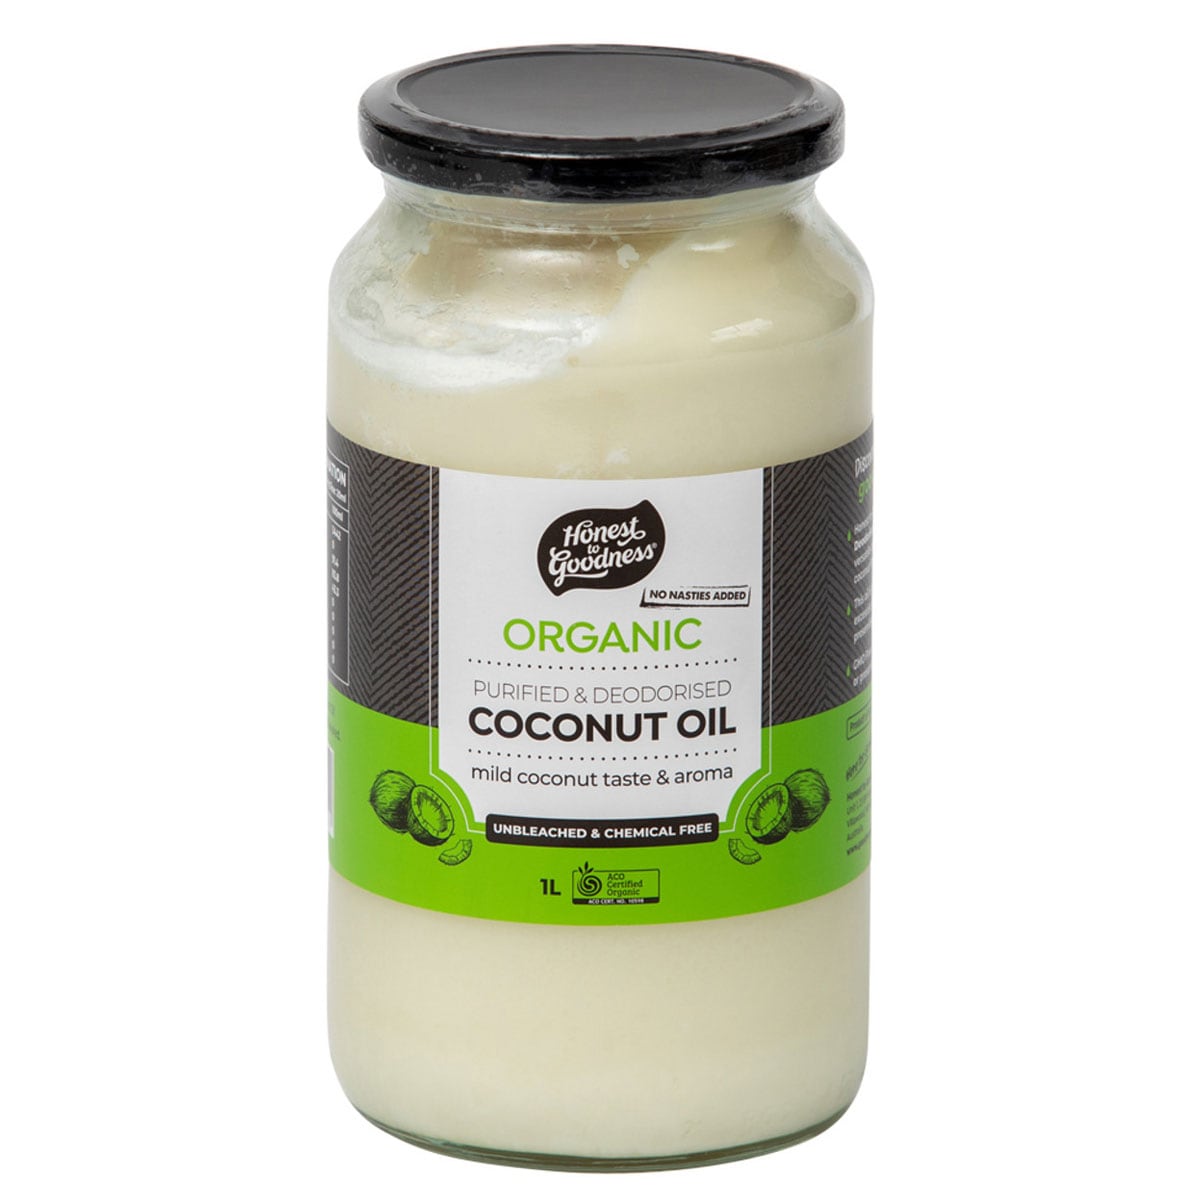 Honest to Goodness Organic Coconut Oil Purified & Deodorised 1 Litre